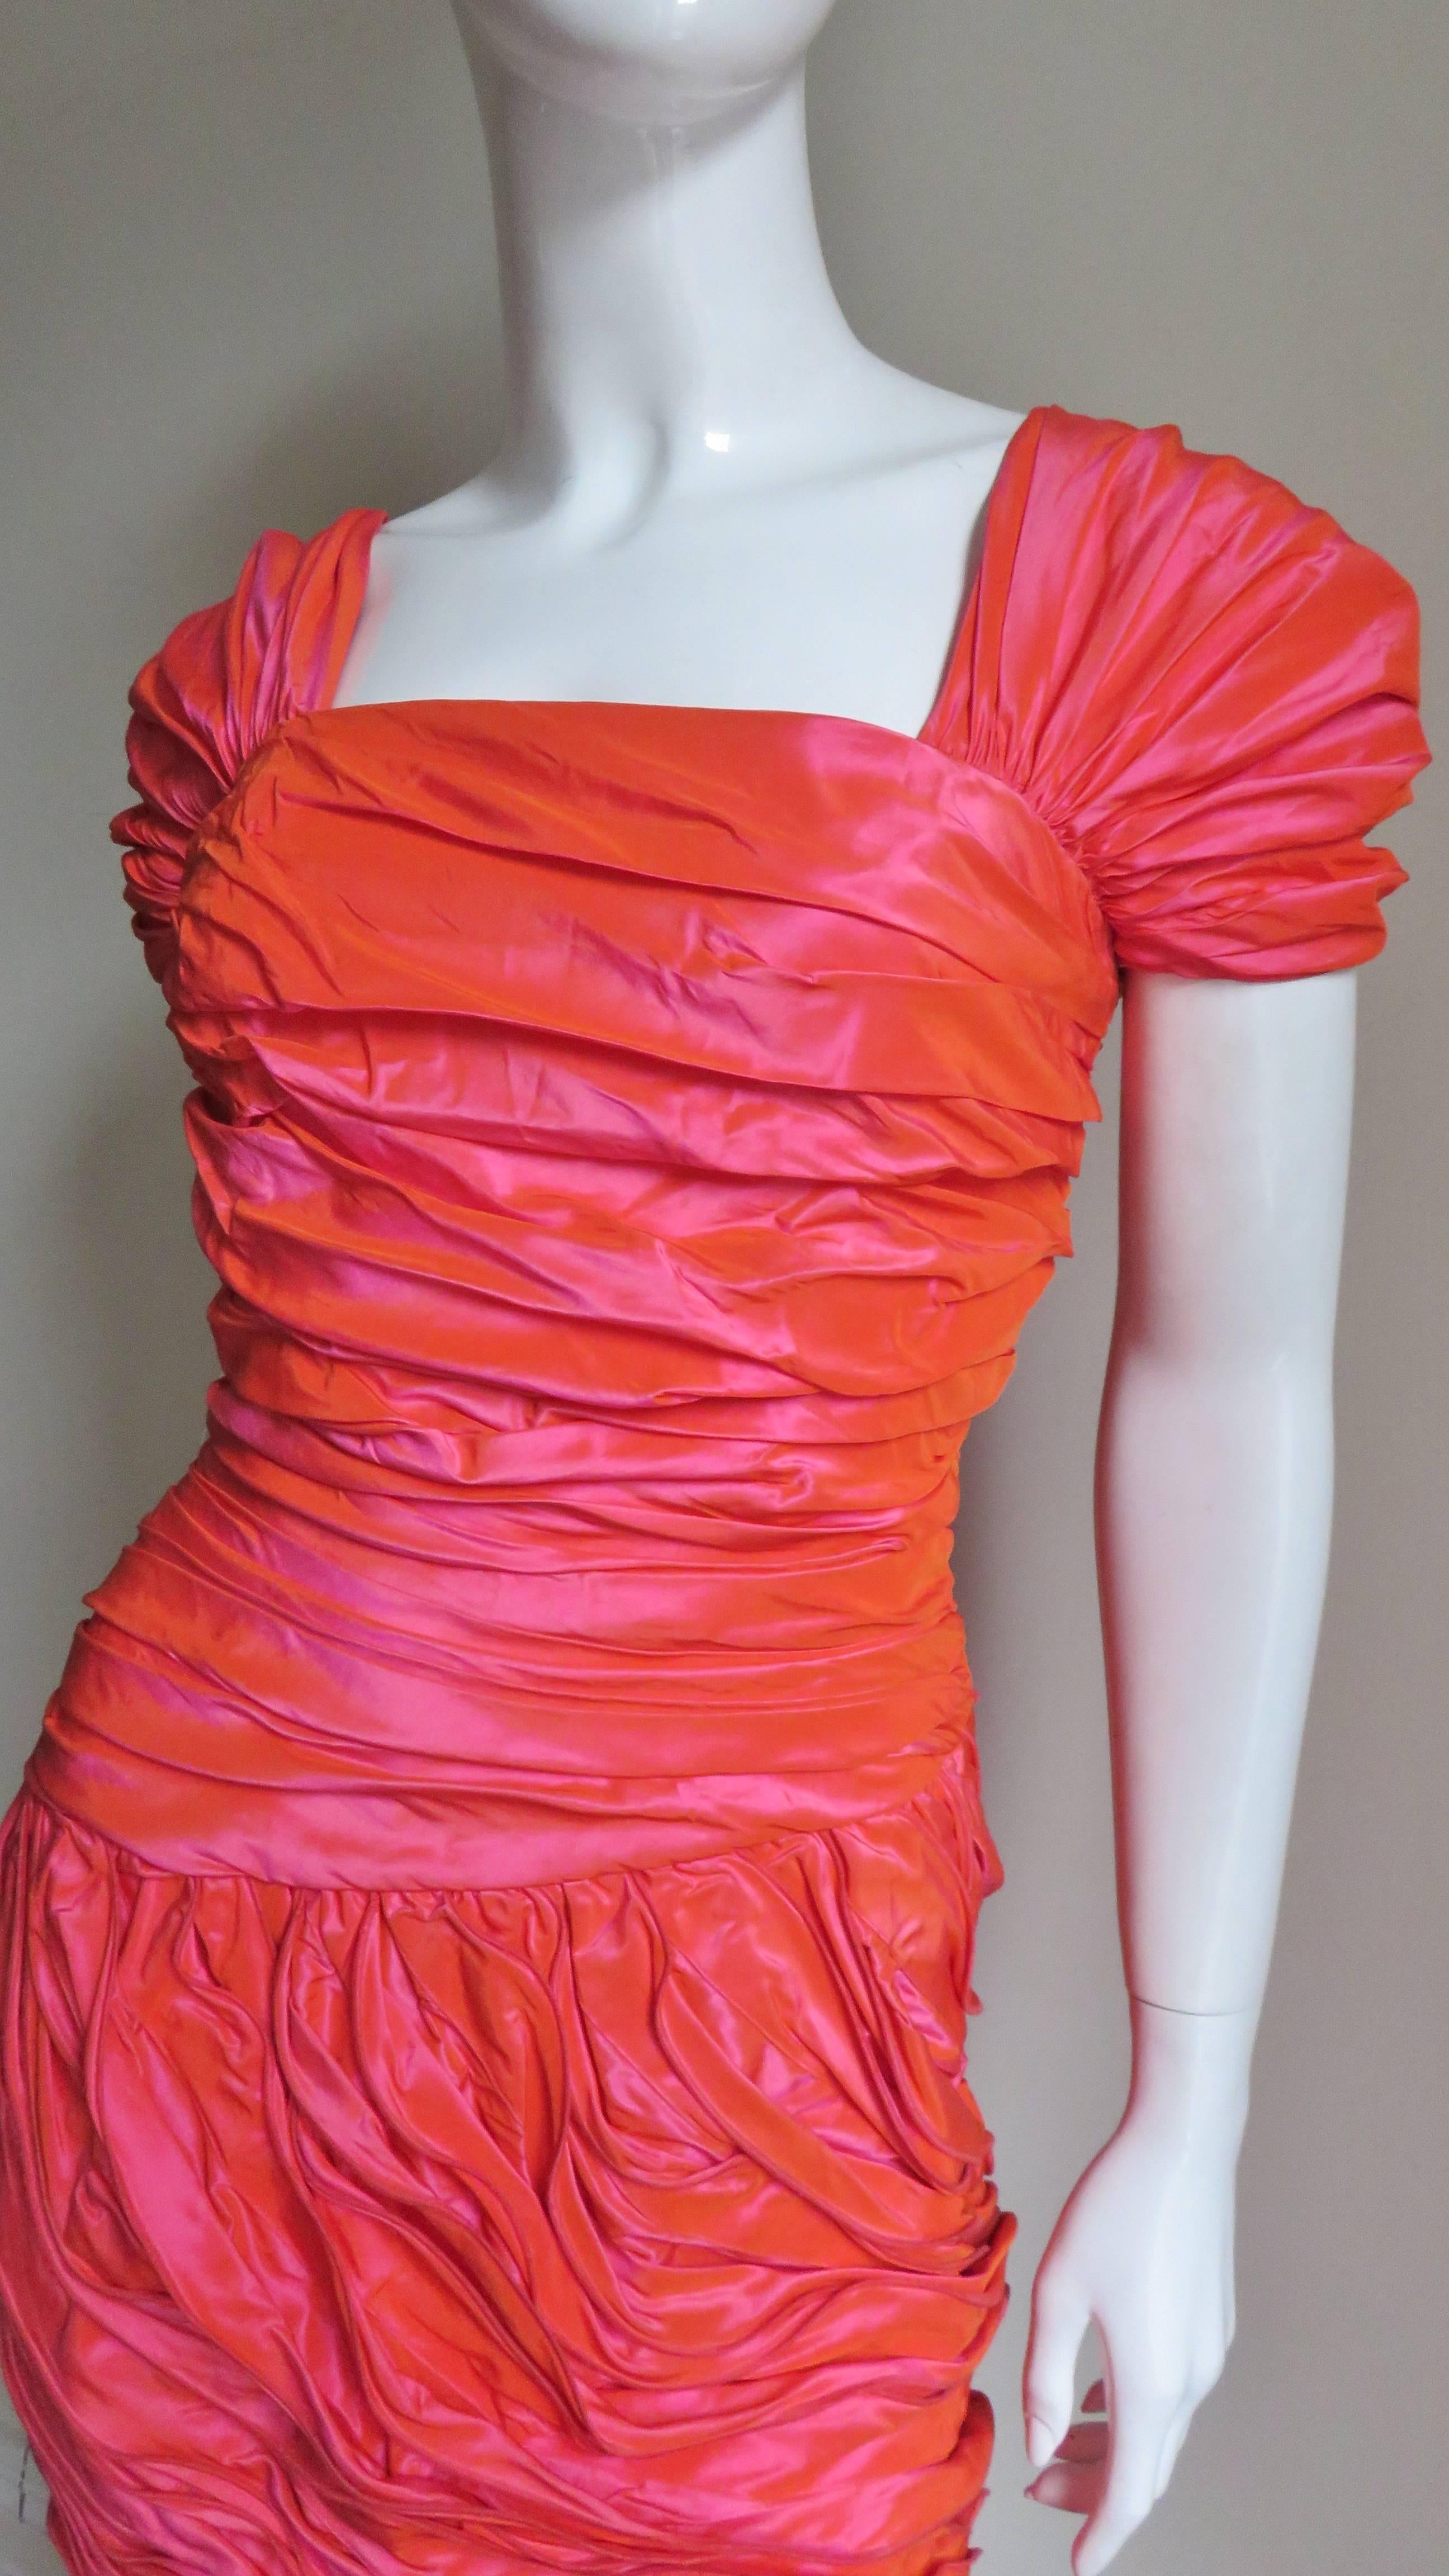 Louis Feraud 1980s Silk Dress with Elaborate Layers  In Good Condition For Sale In Water Mill, NY